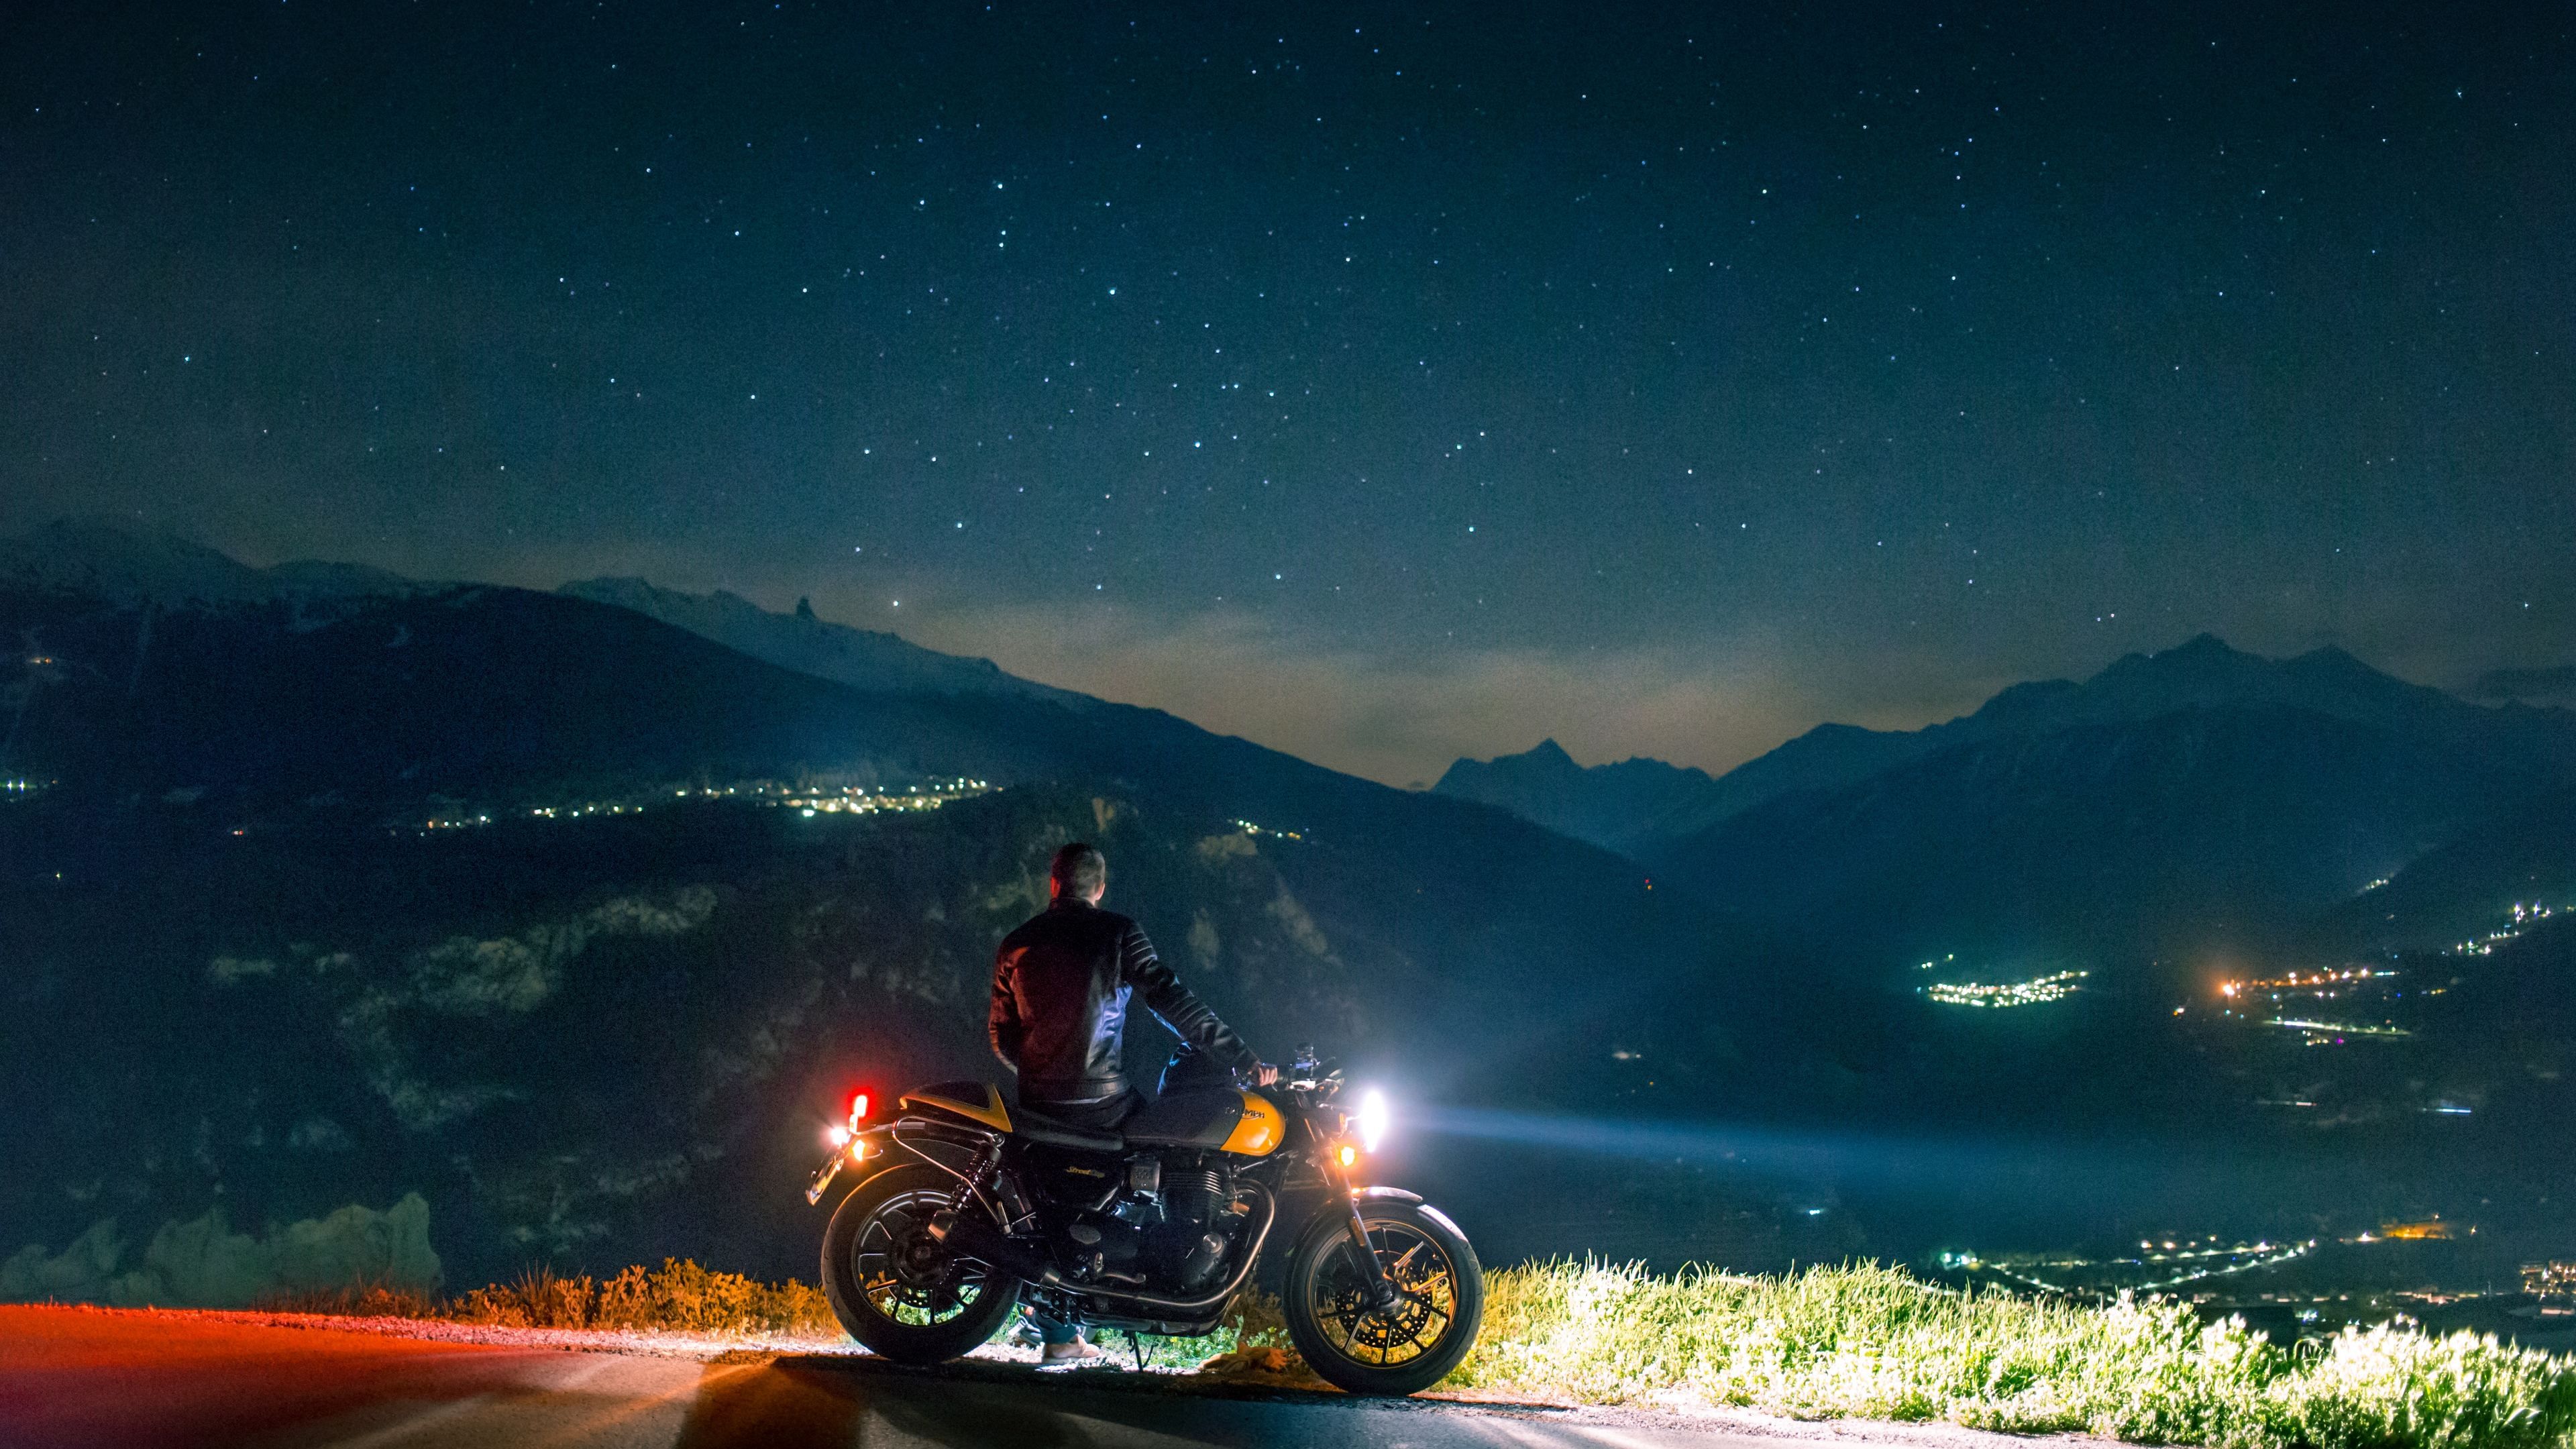 Biker rider chilling on mountain side k photography wallpapers hd